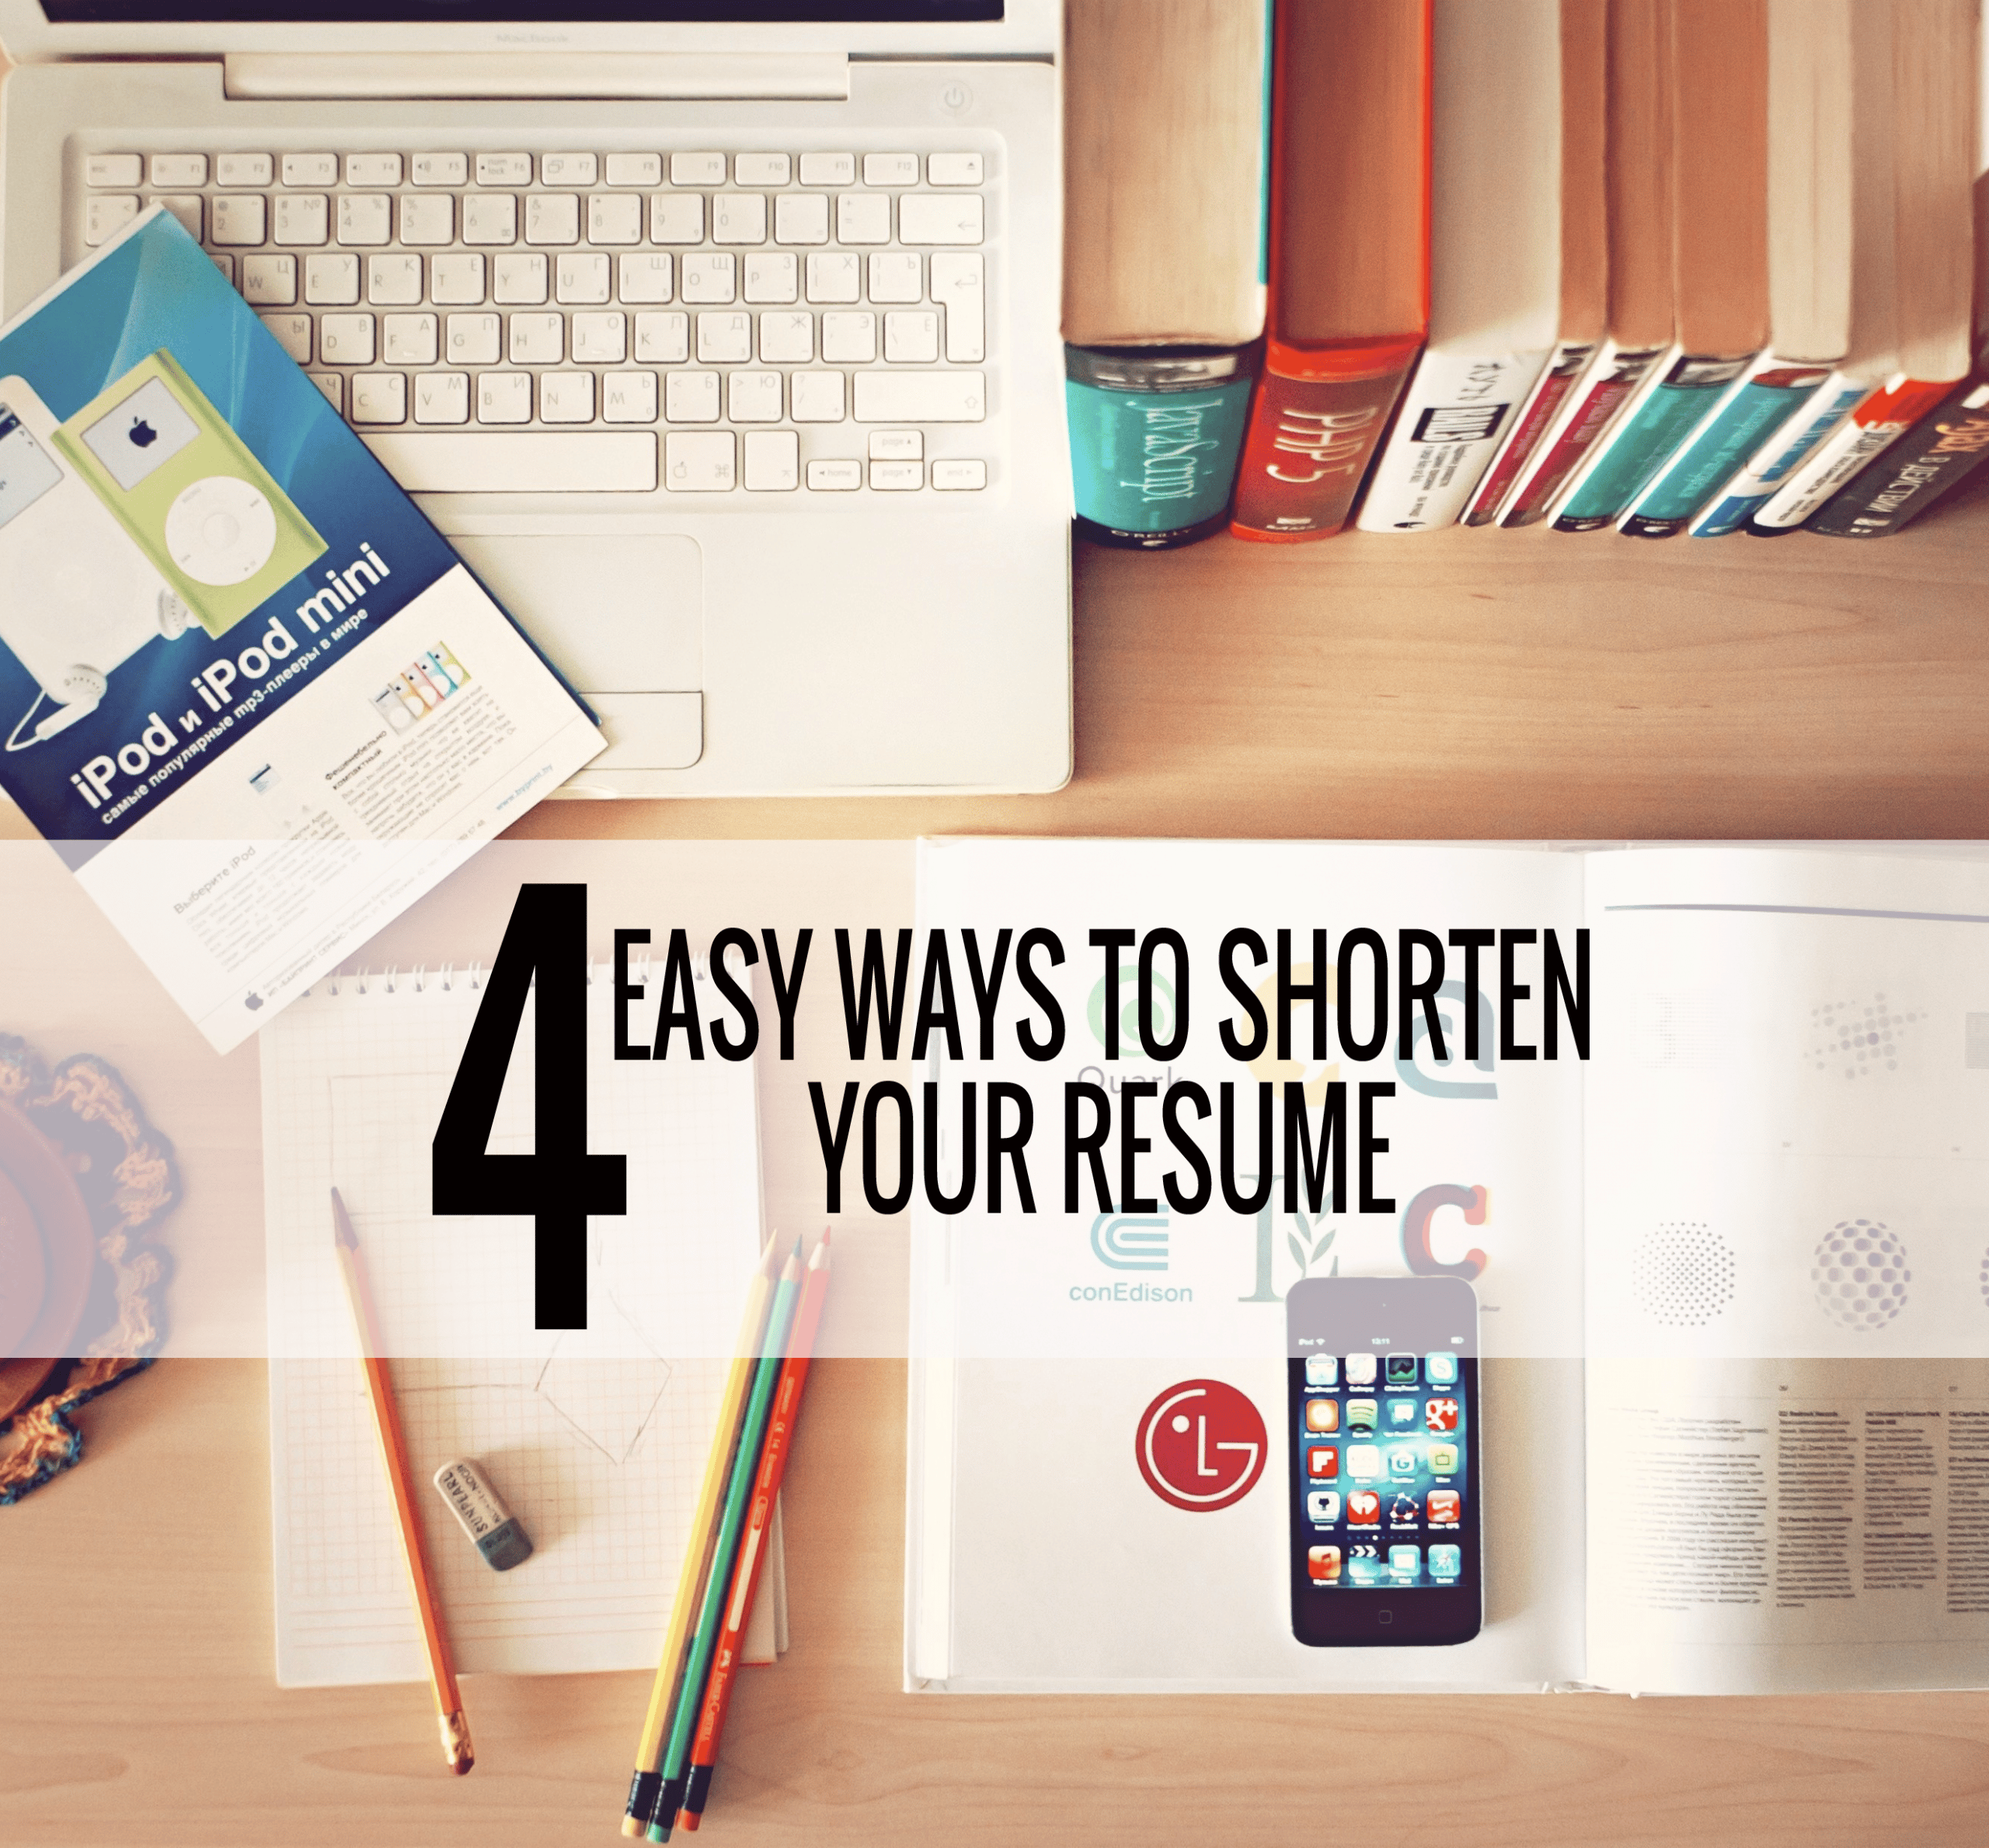 Applying for a new job? Here are 4 easy ways to shorten your resume ...